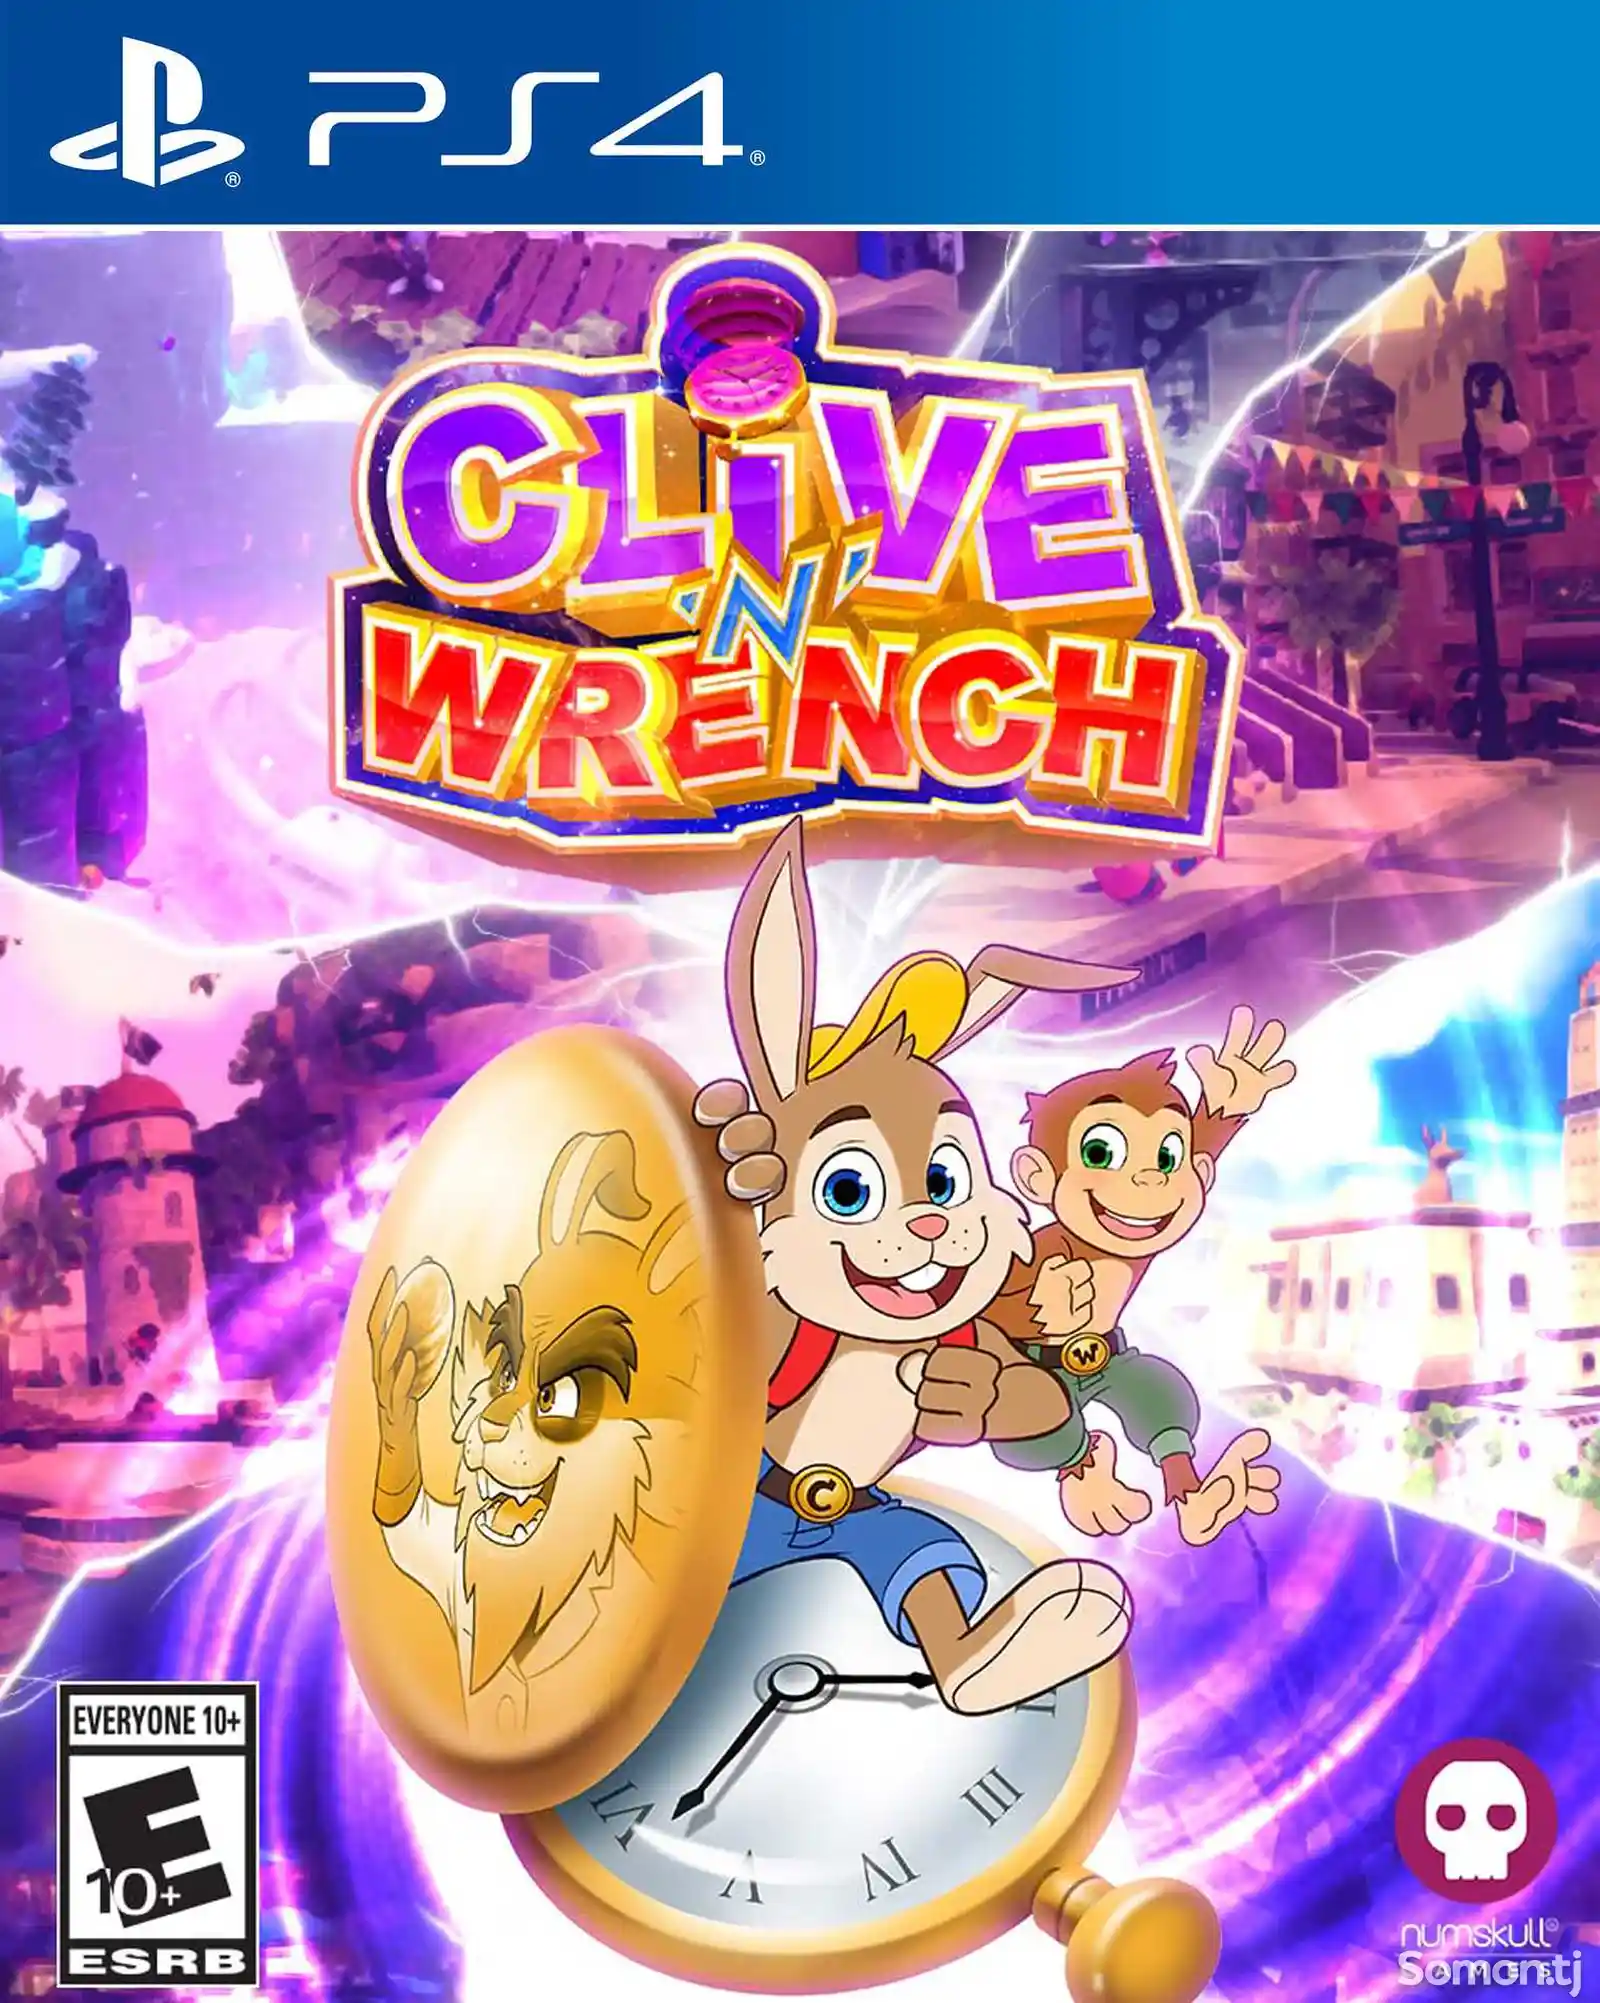 Игра Clive n wrench для PS-4 / 5.05 / 6.72 / 7.02 / 7.55 / 9.00 /-1